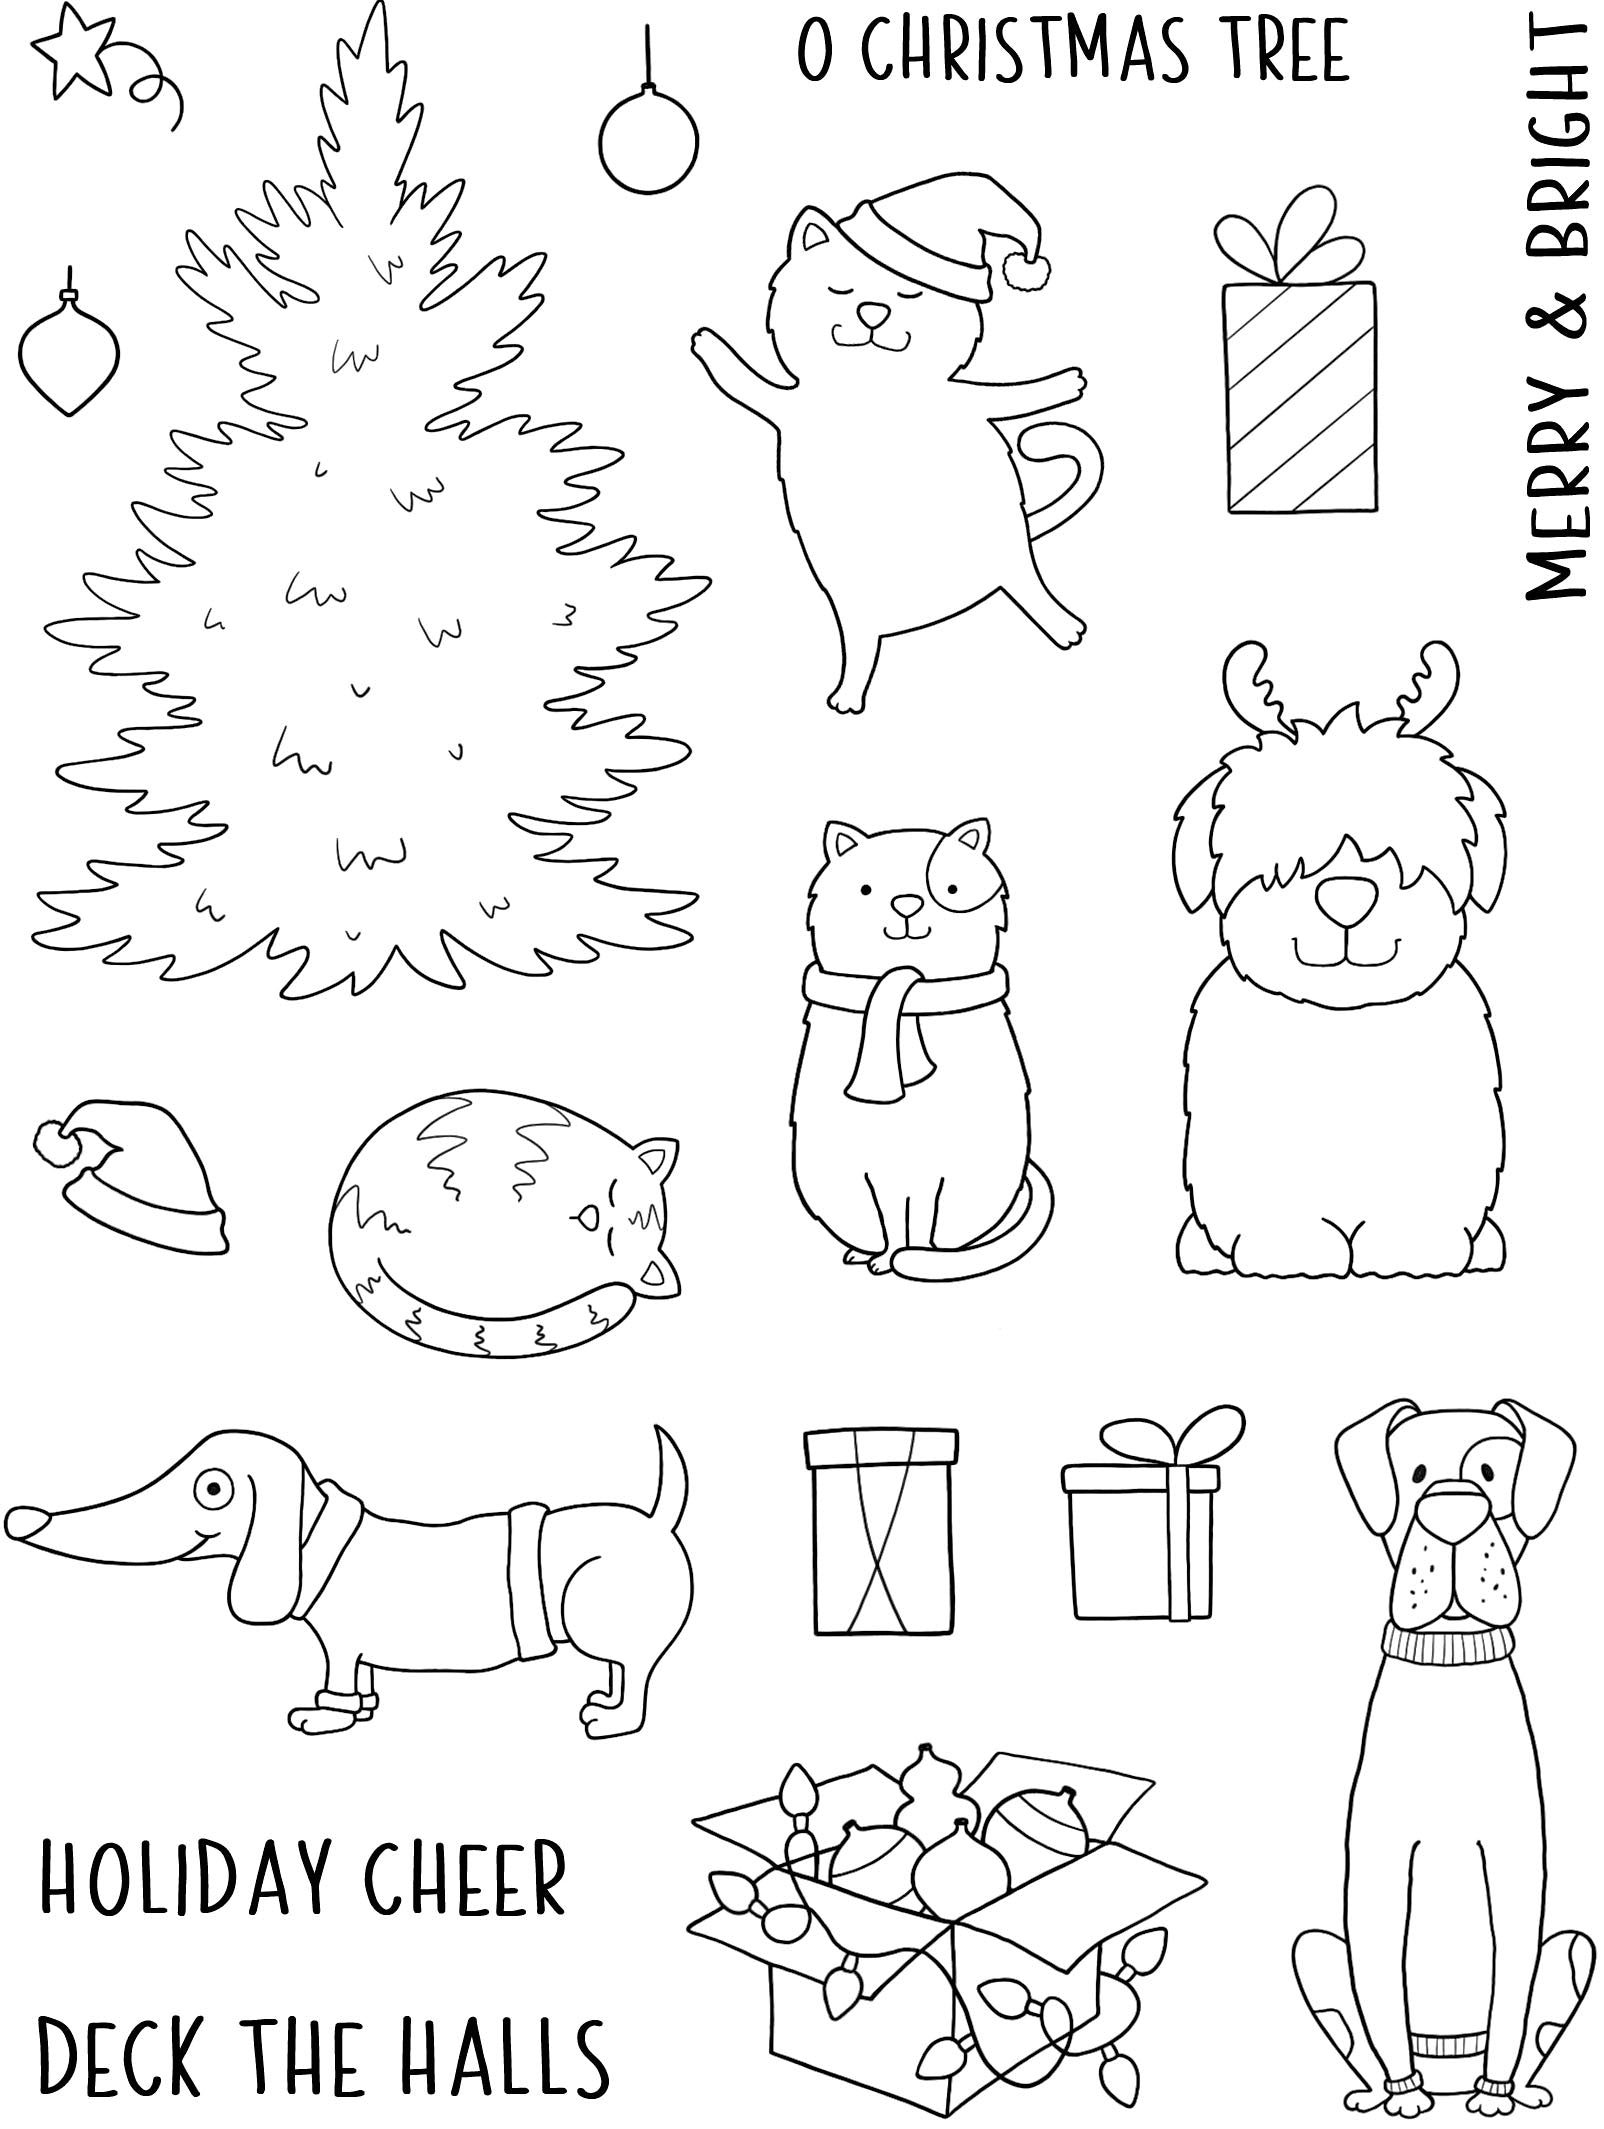 Creative Expressions Jane's Doodles O Christmas Tree 6 in x 8 in Clear Stamp Set